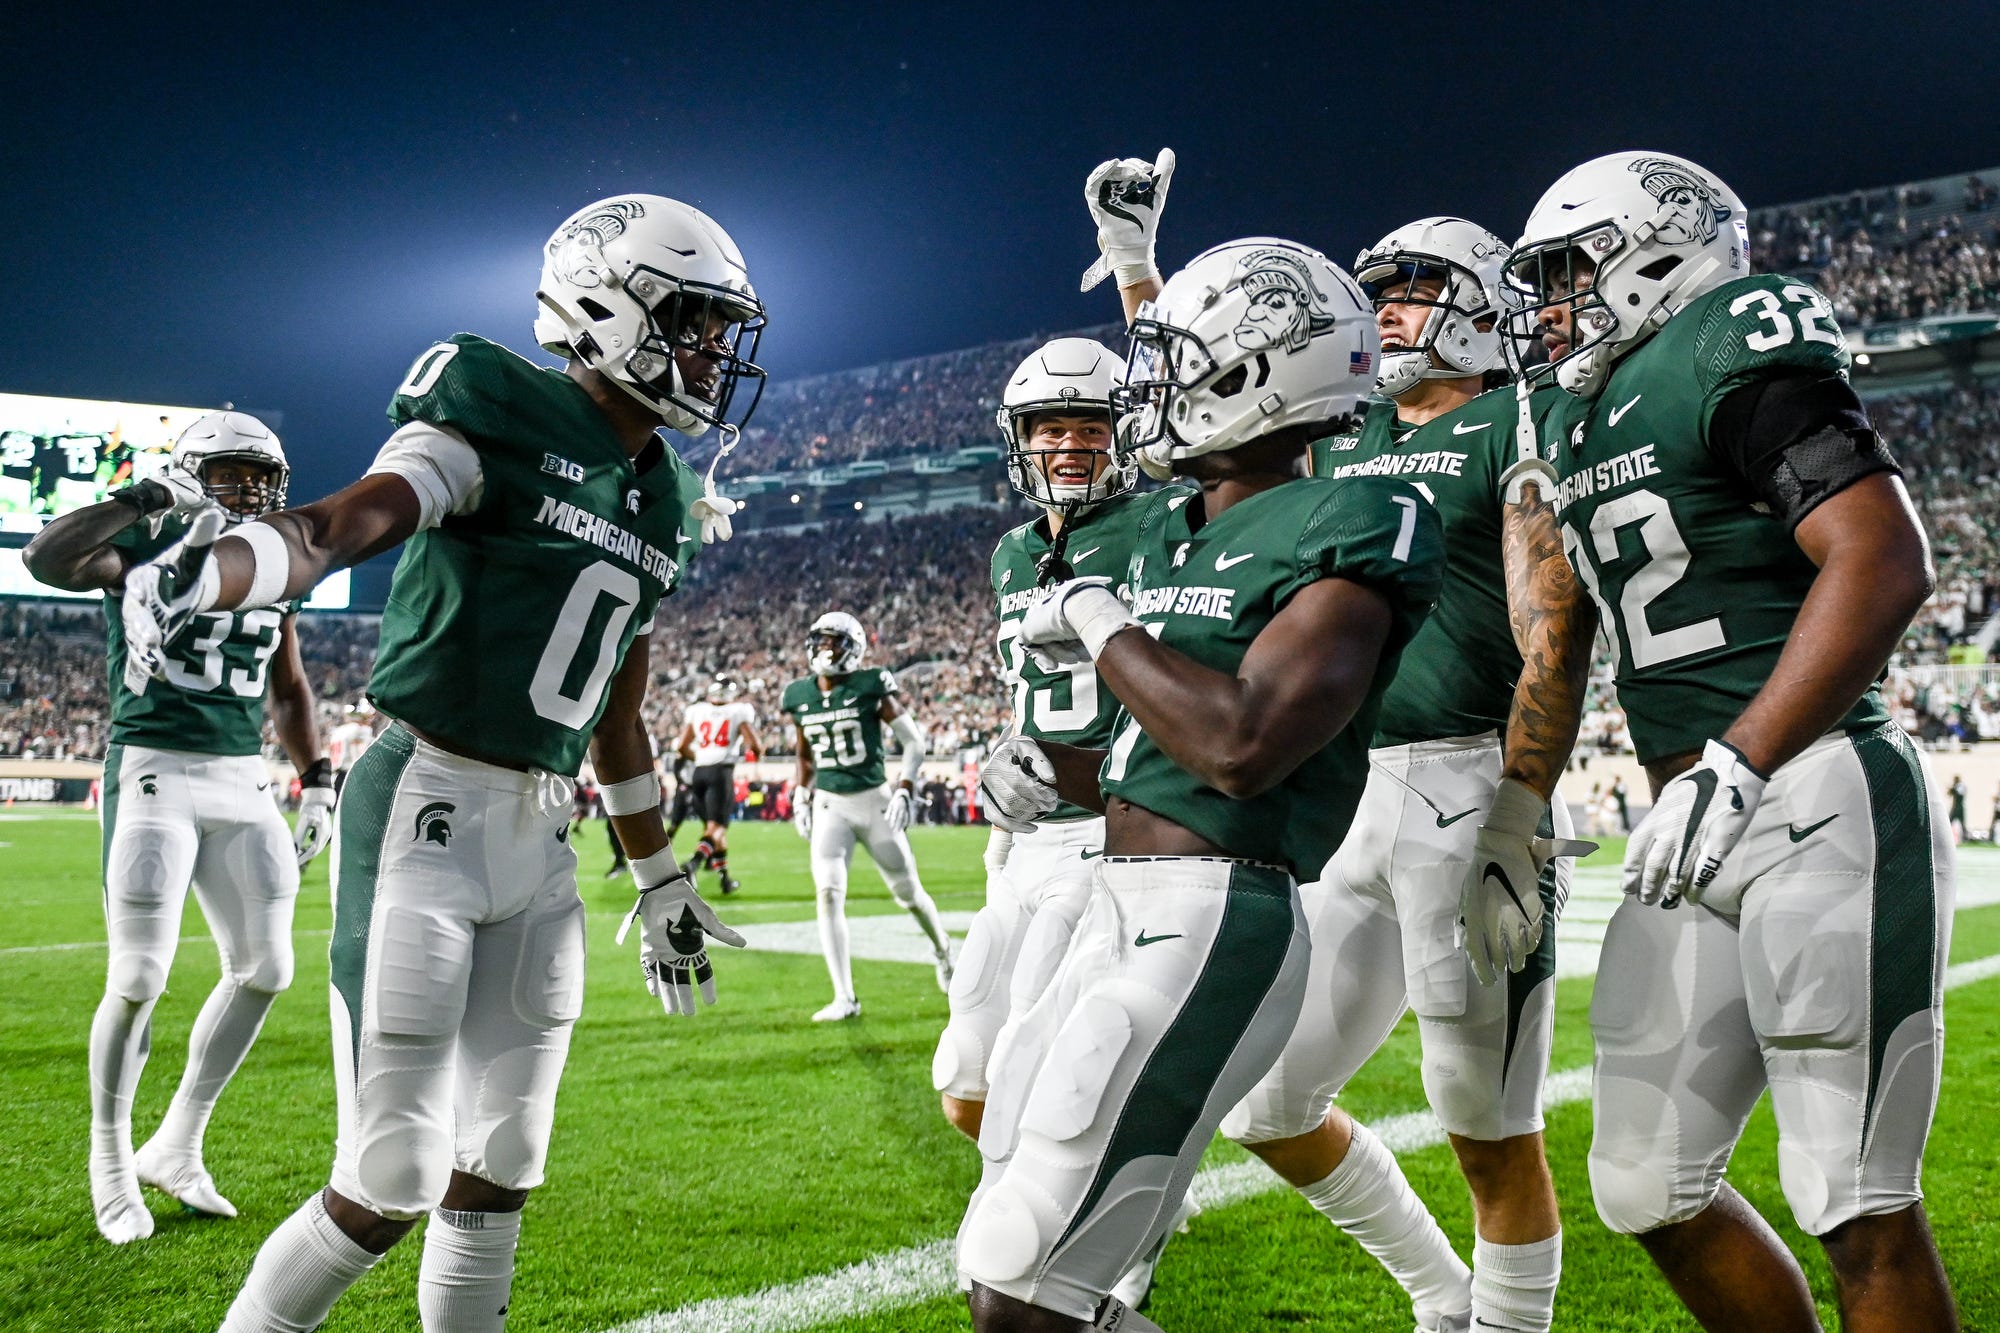 Michigan State Spartans 2022 Football Schedule Msu Football's 2022 Big Ten Schedule Unveiled: 3 Quick Takes